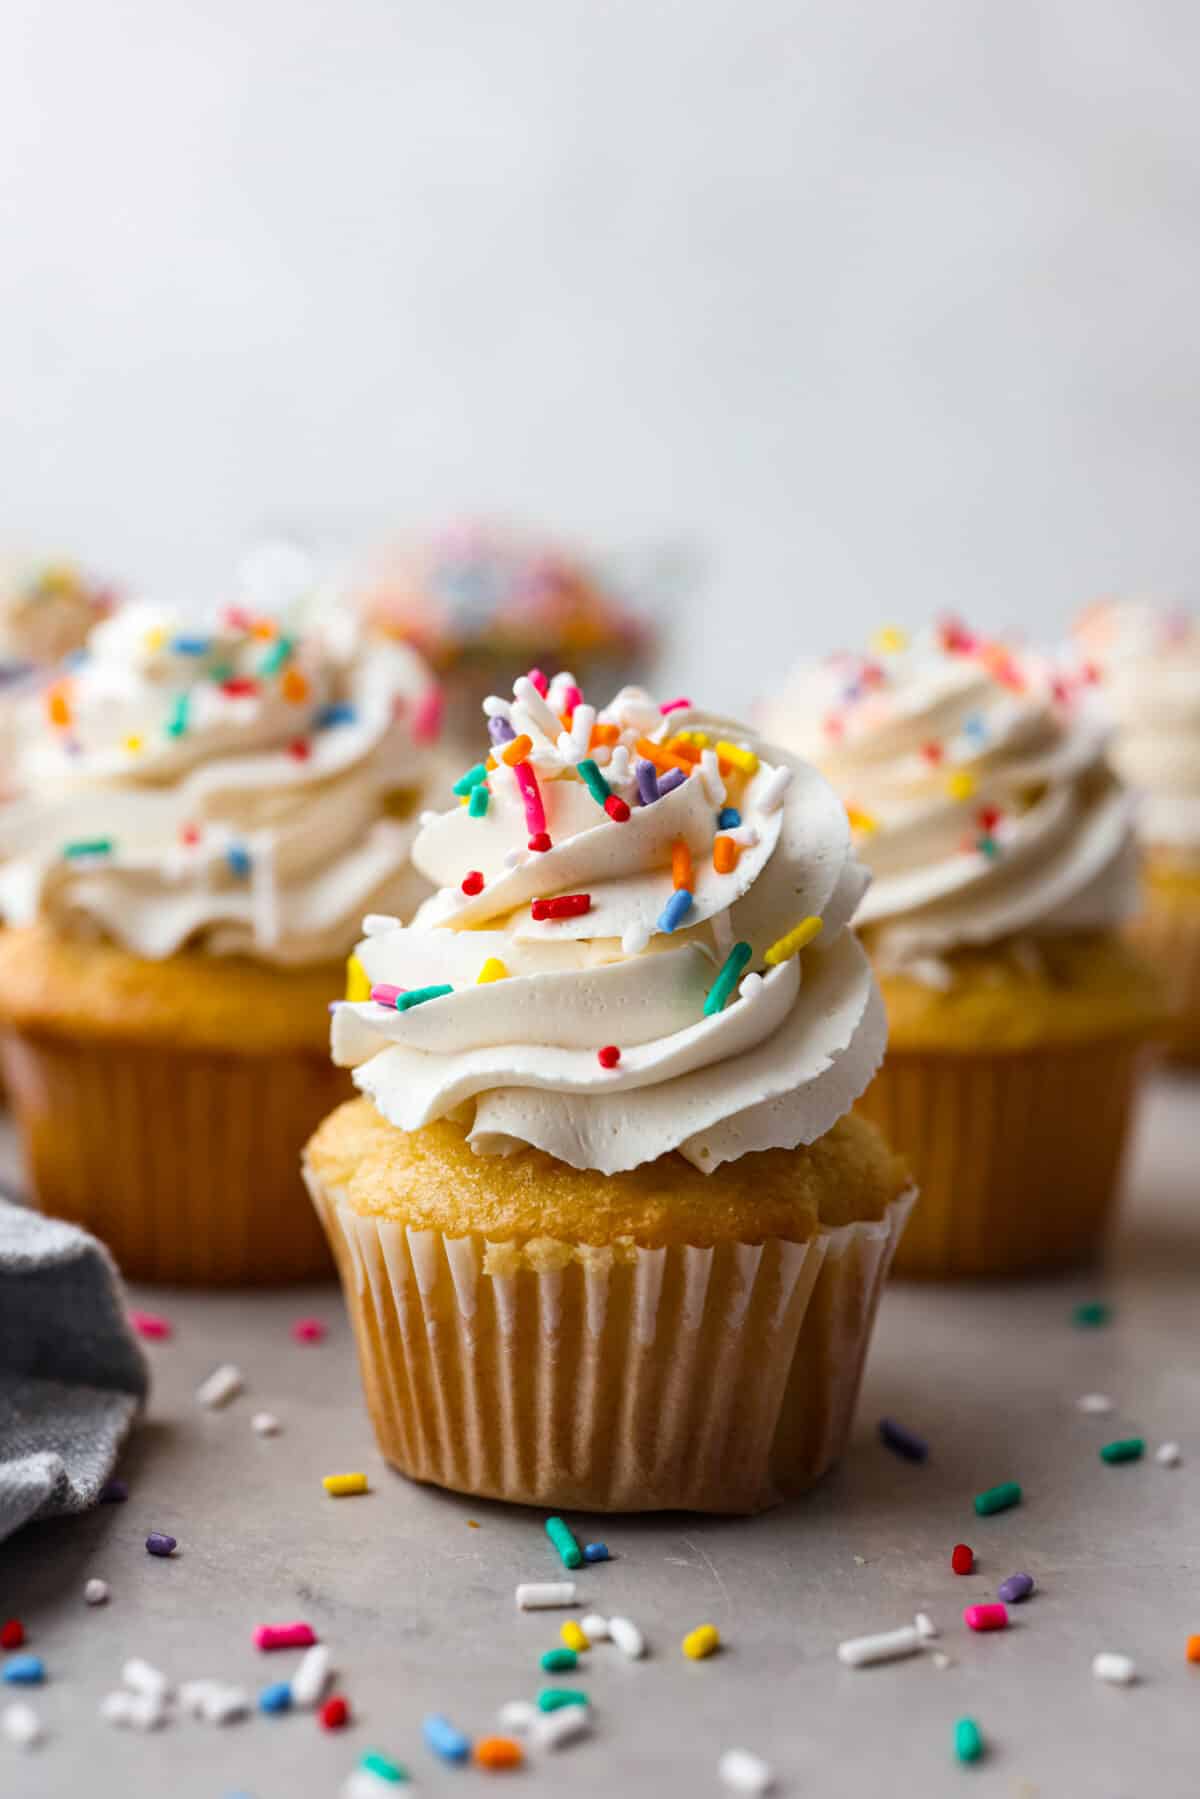 A cupcake frosted with meringue buttercream and topped with multicolored sprinkles